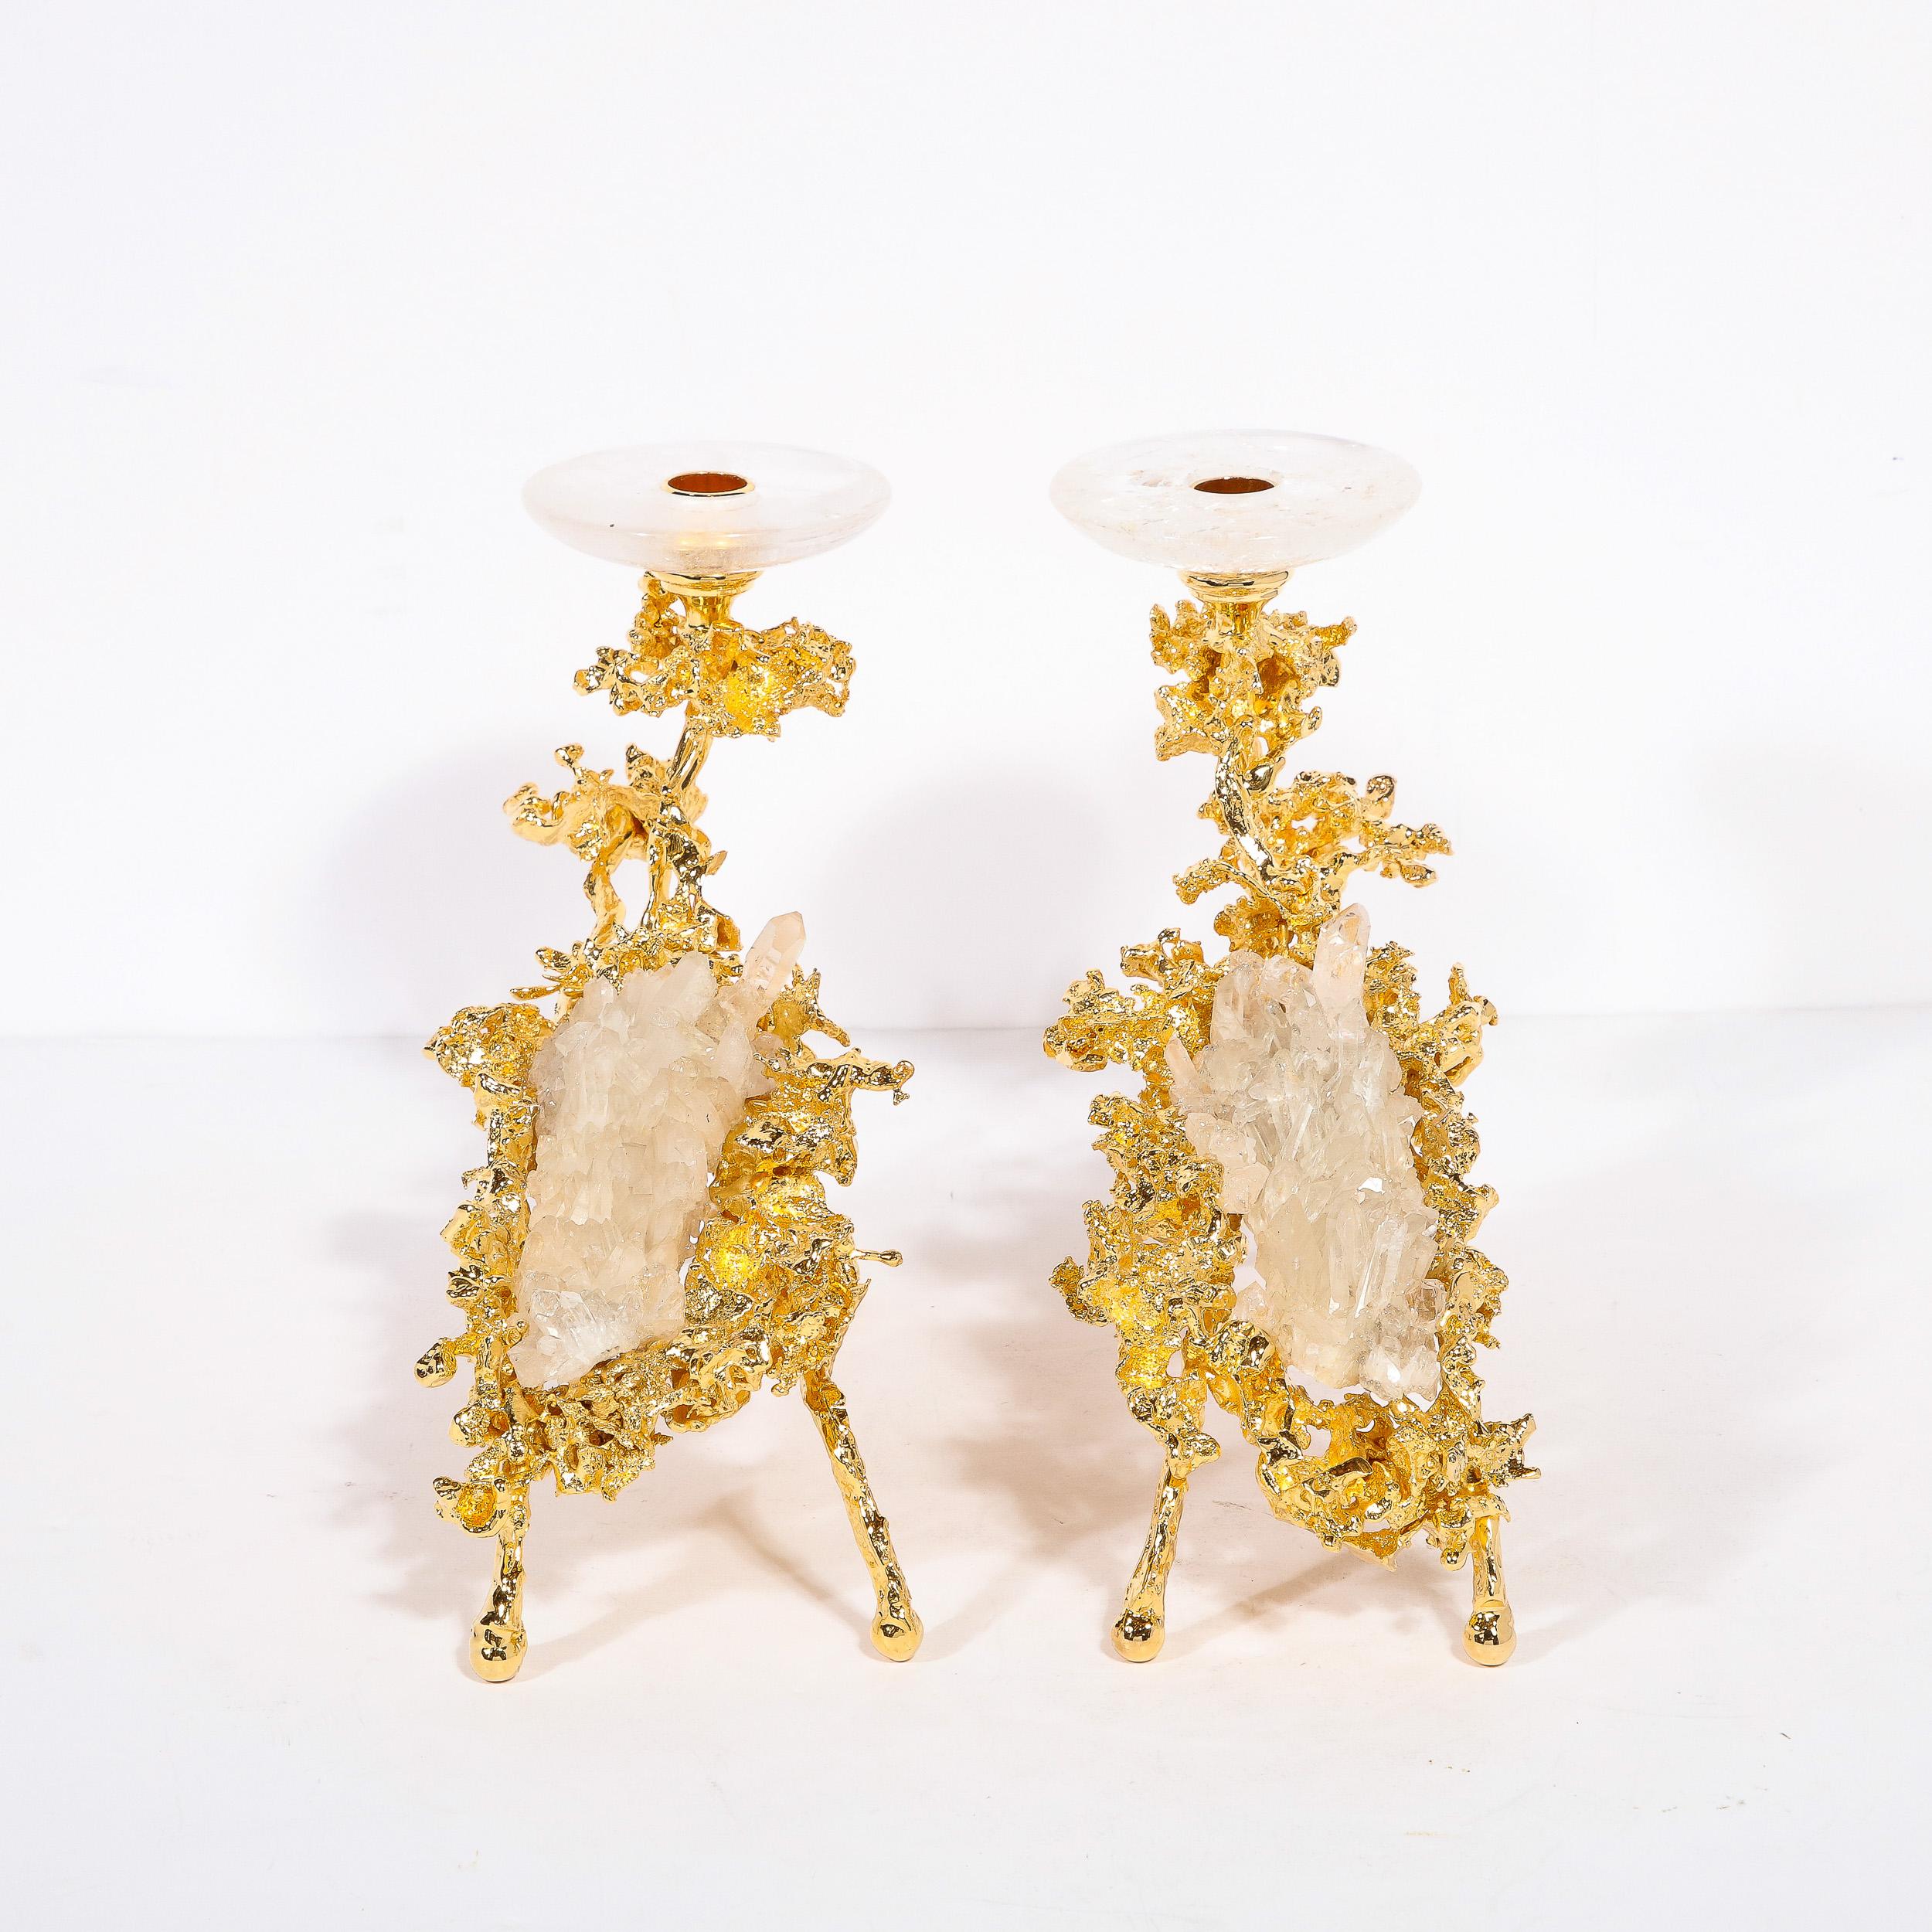 Pair of 24Karat Gold Low Branch Candleholders w/ Rock Crystals by Claude Boeltz For Sale 6